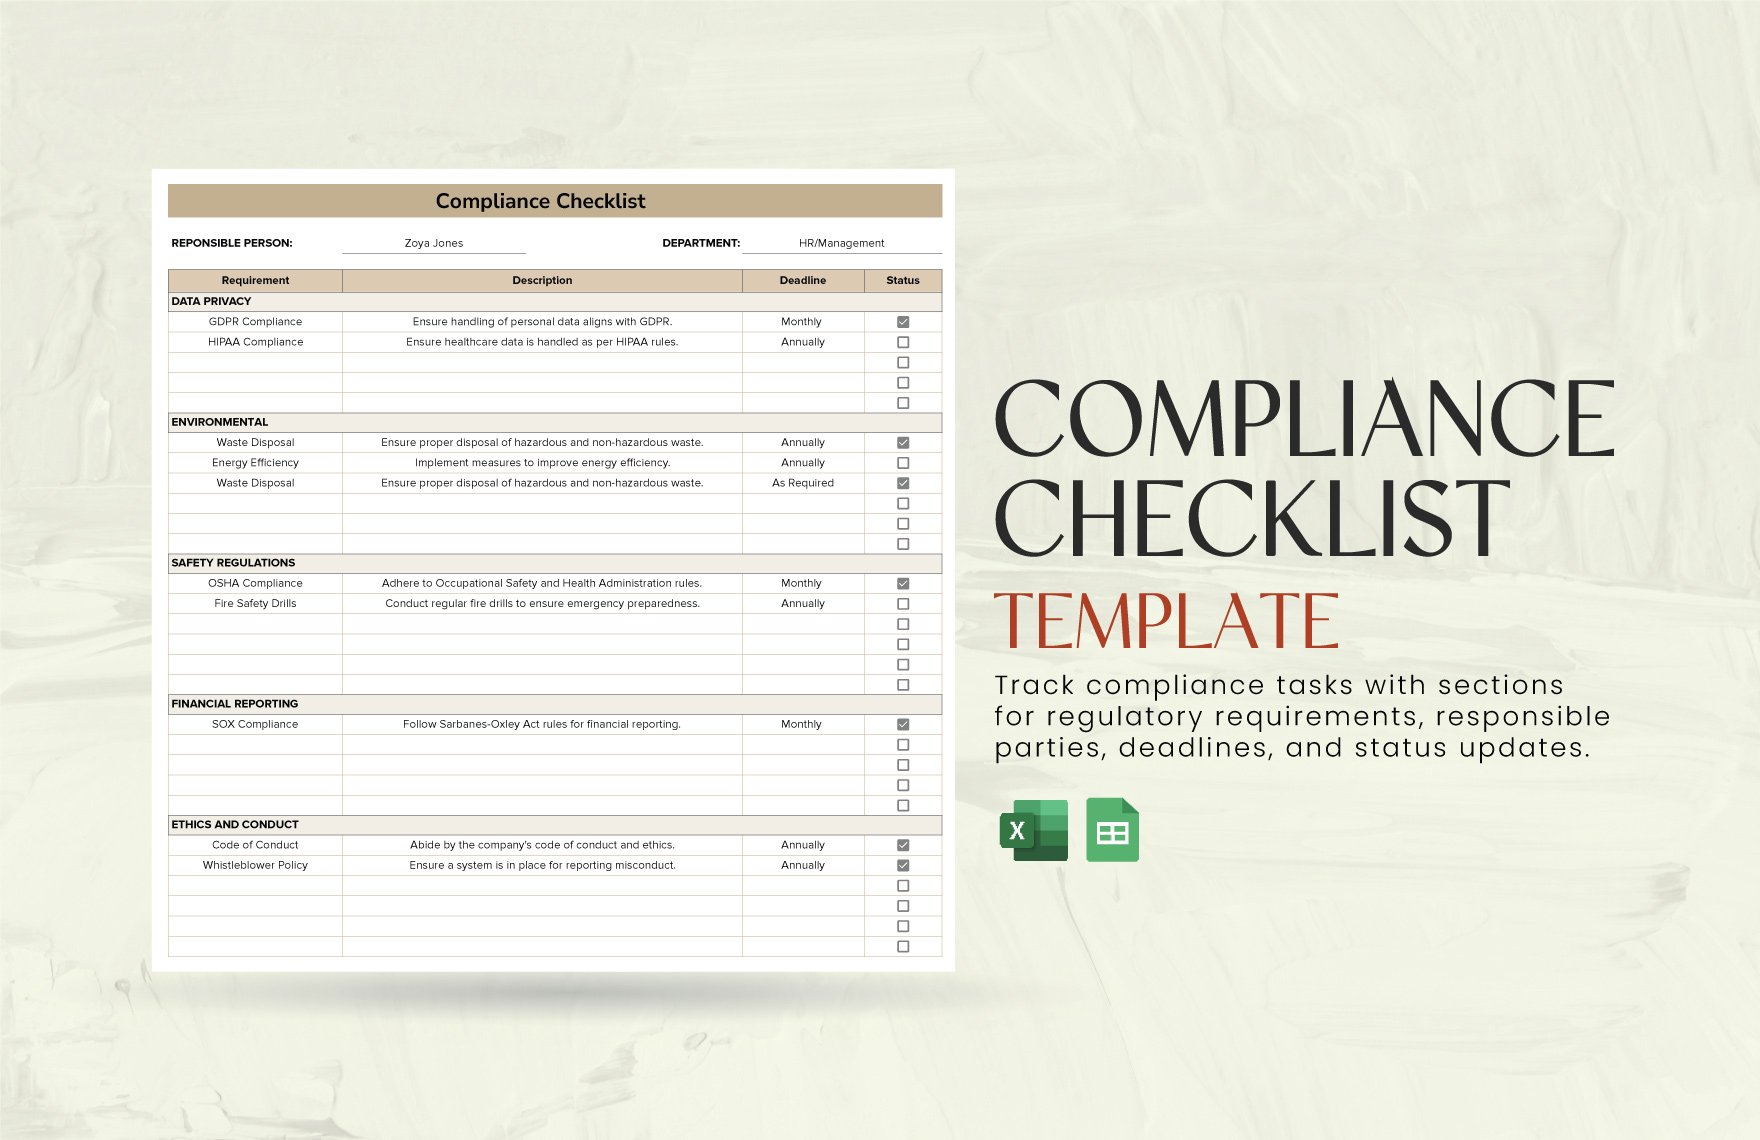 Compliance Checklist Template in Excel, Google Sheets